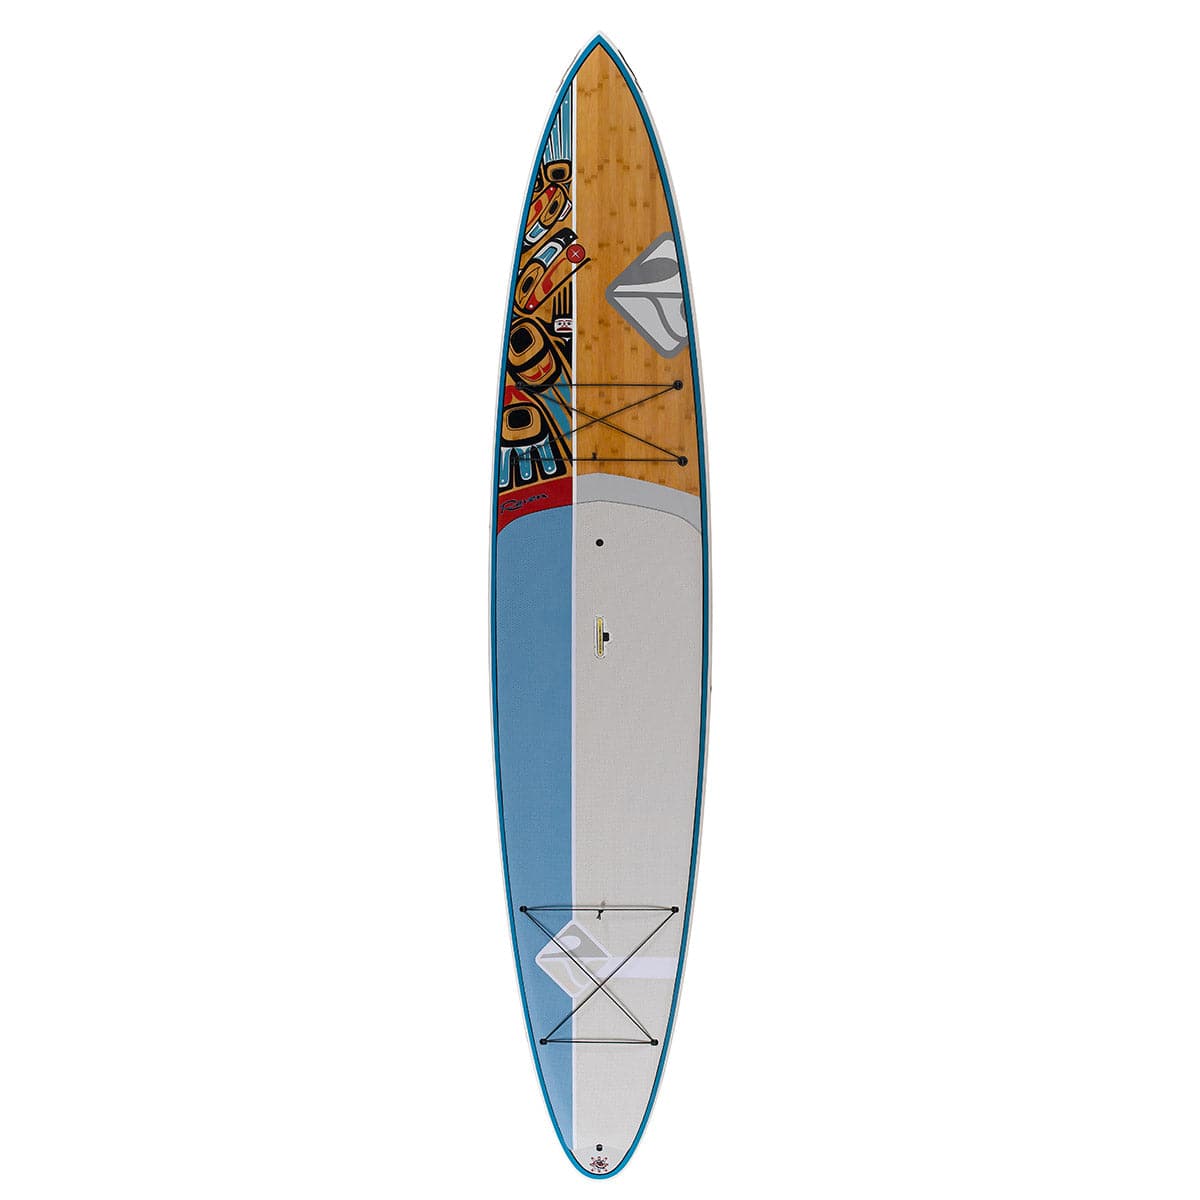 Featuring the Raven 12'6 rigid sup manufactured by Boardworks shown here from one angle.